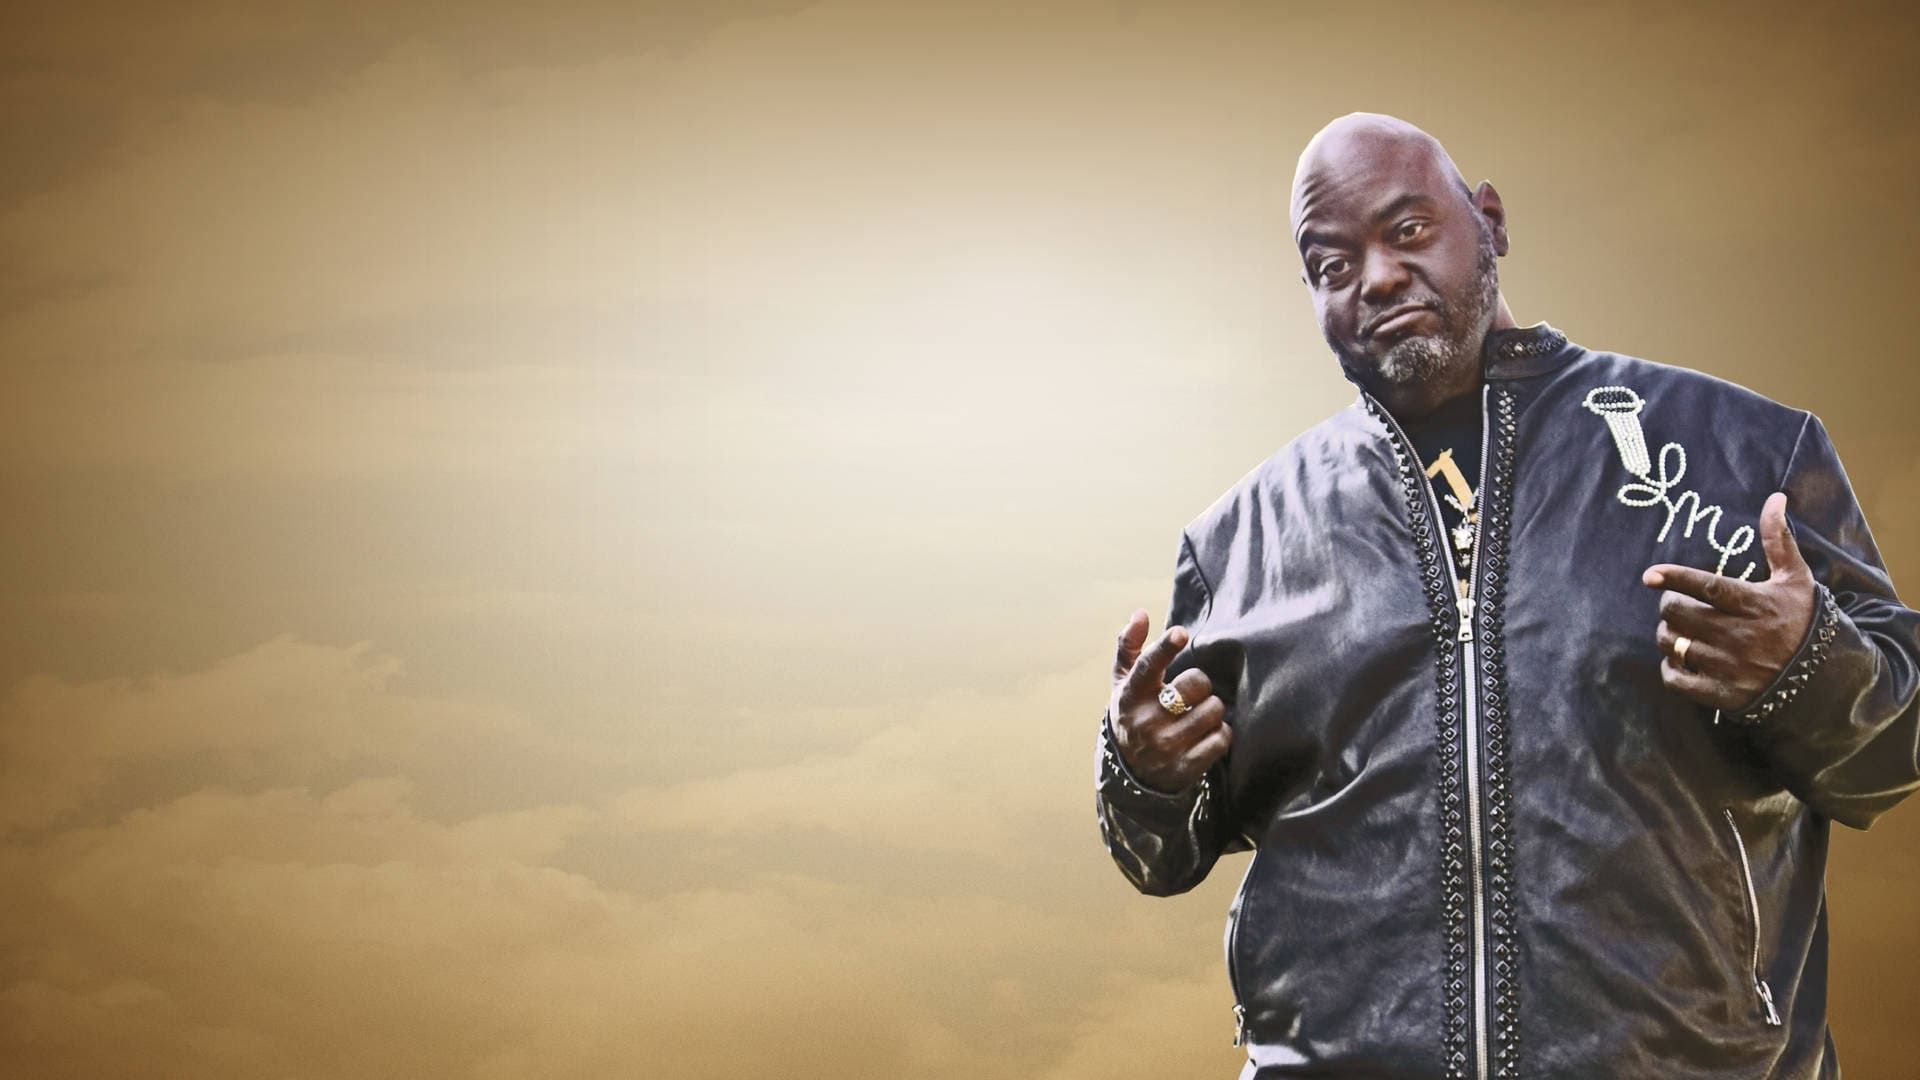 Lavell Crawford: New Look, Same Funny! background